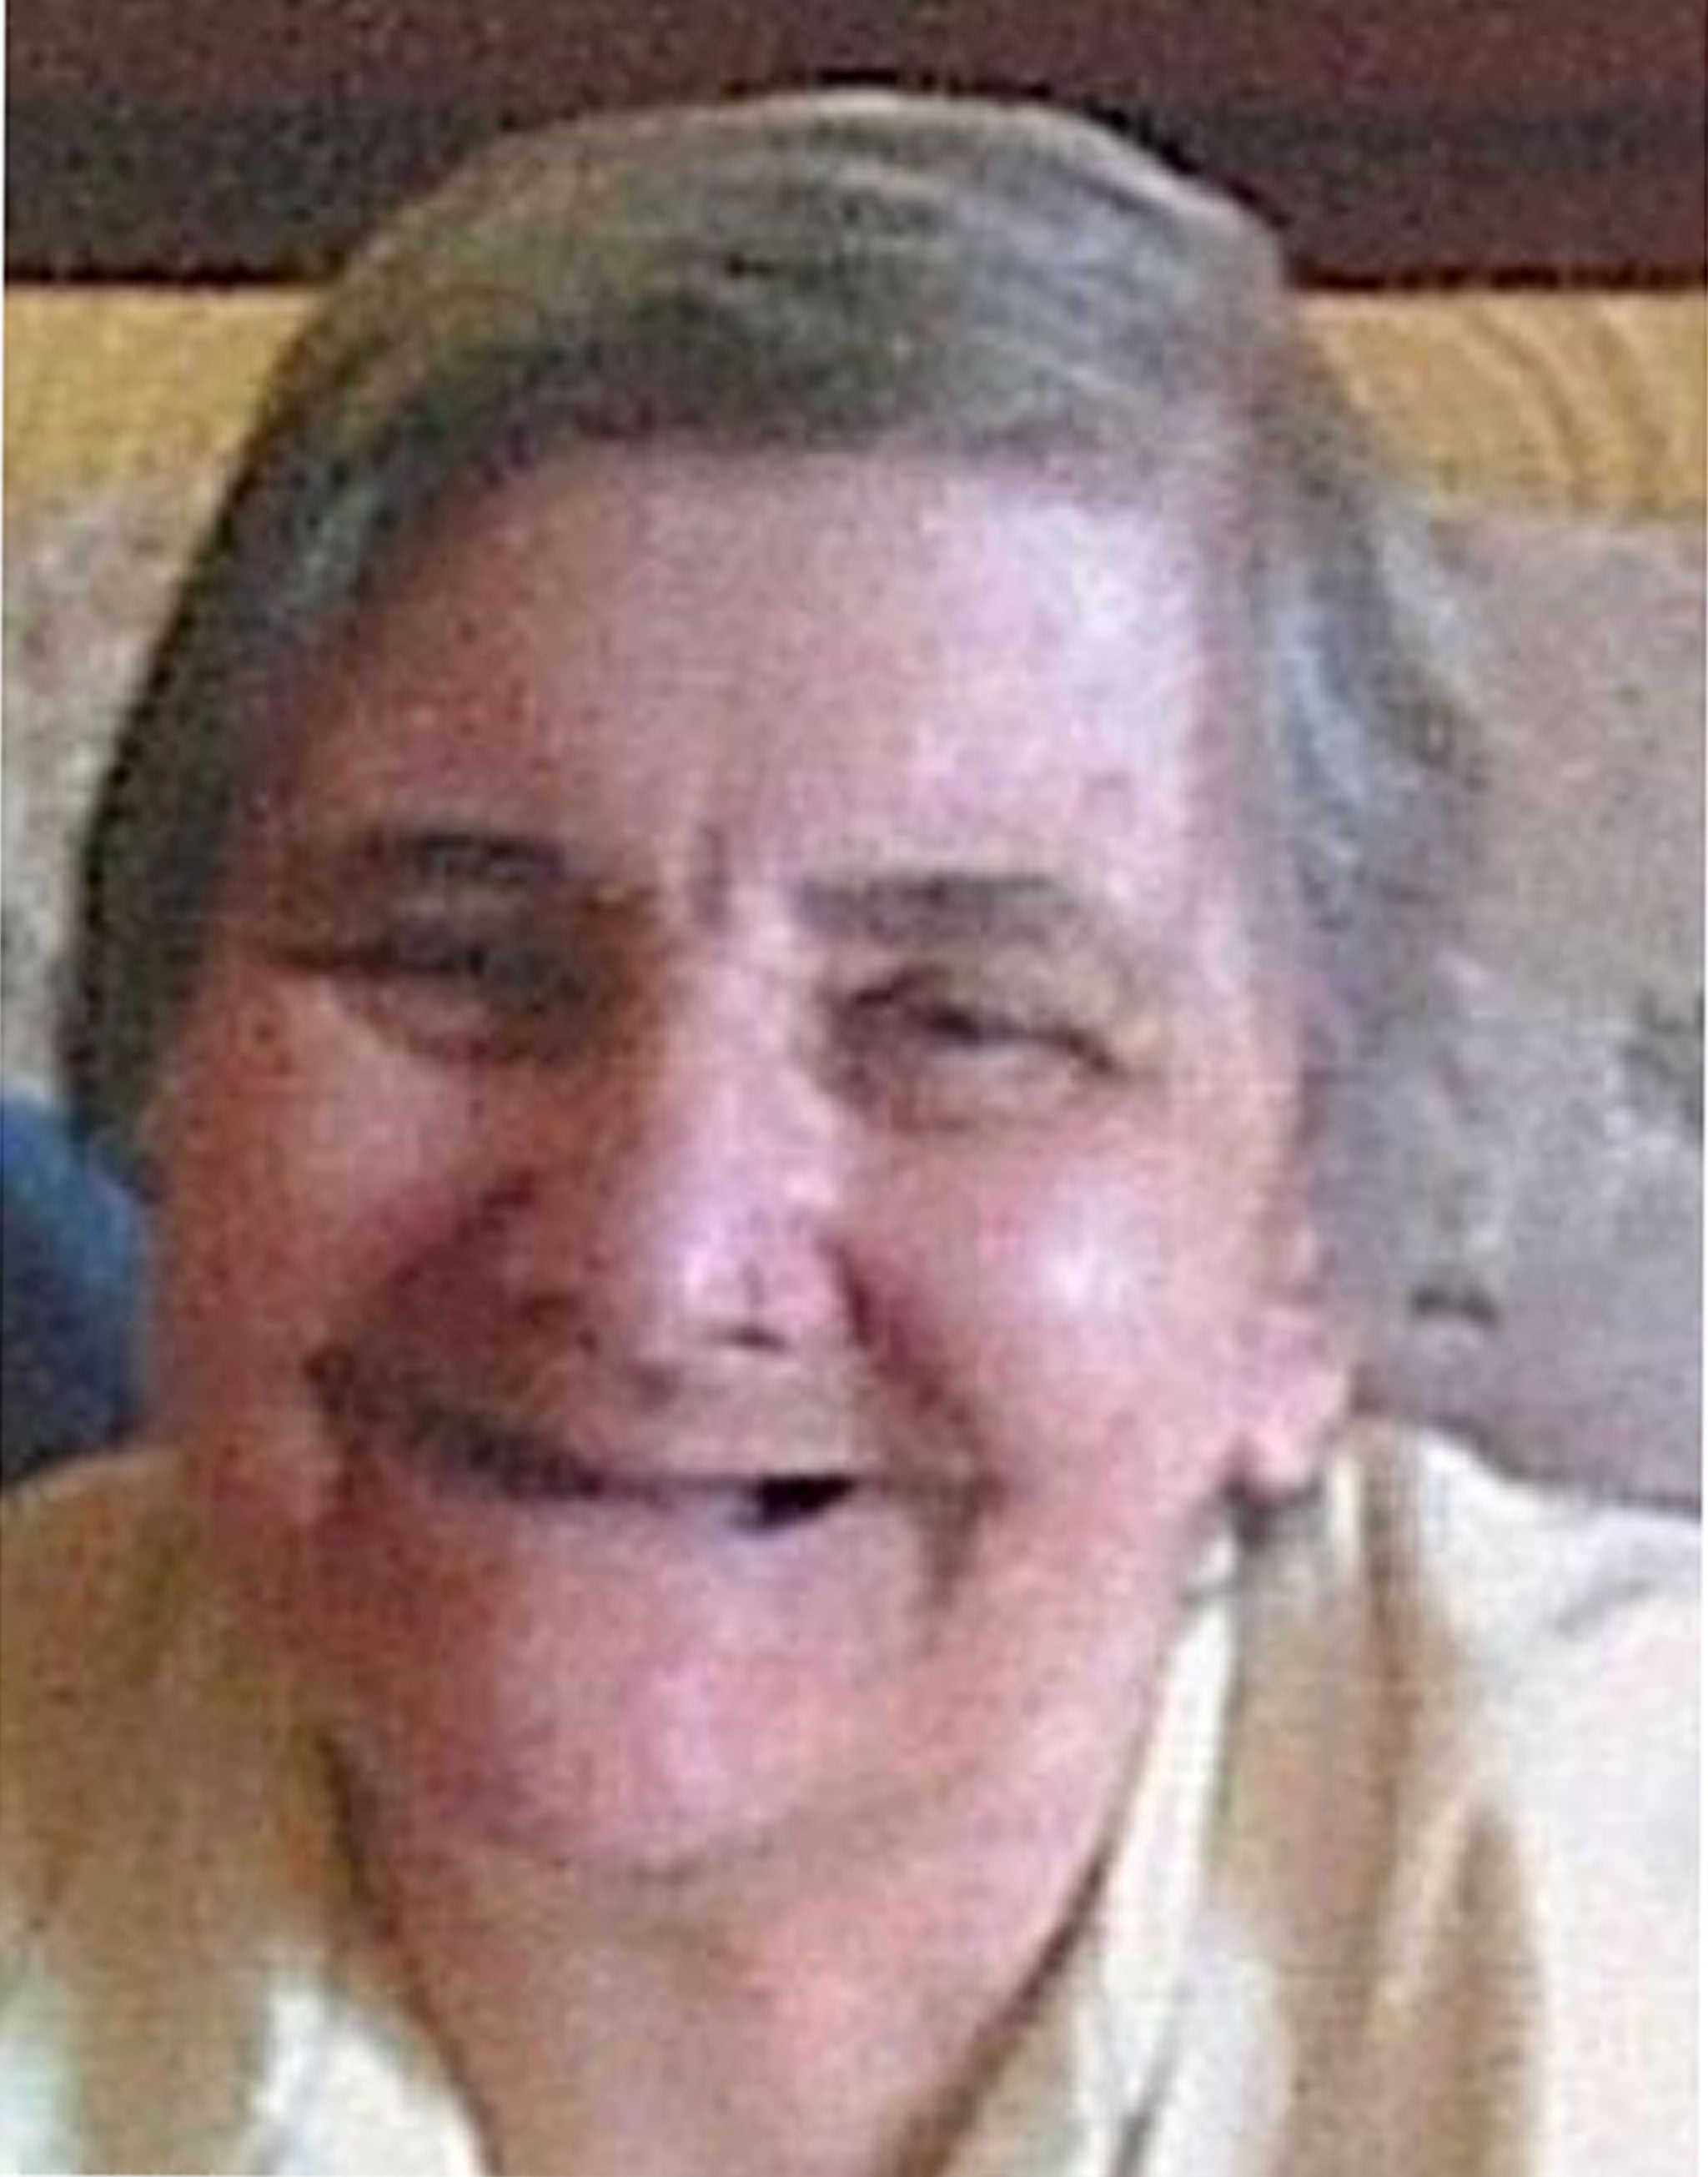 81-year-old Annie Beaver was killed at her home on Saturday